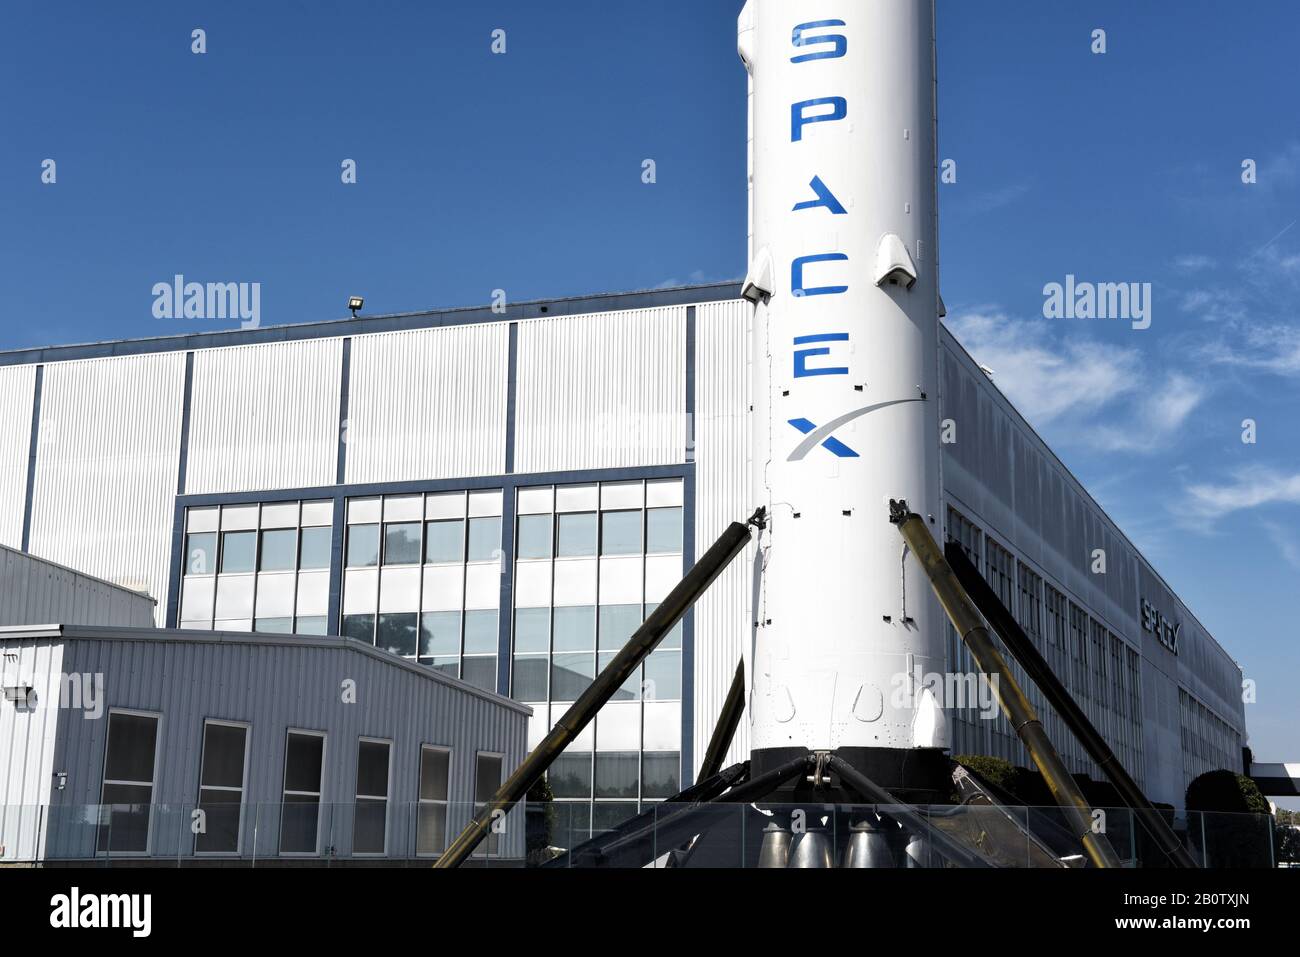 HAWTHORNE, CALIFORNIA - 17 FEB 2020: Closeup of a Falcon 9 Booster rocket at Space Exploration Technologies Corp, trading as SpaceX, a private America Stock Photo